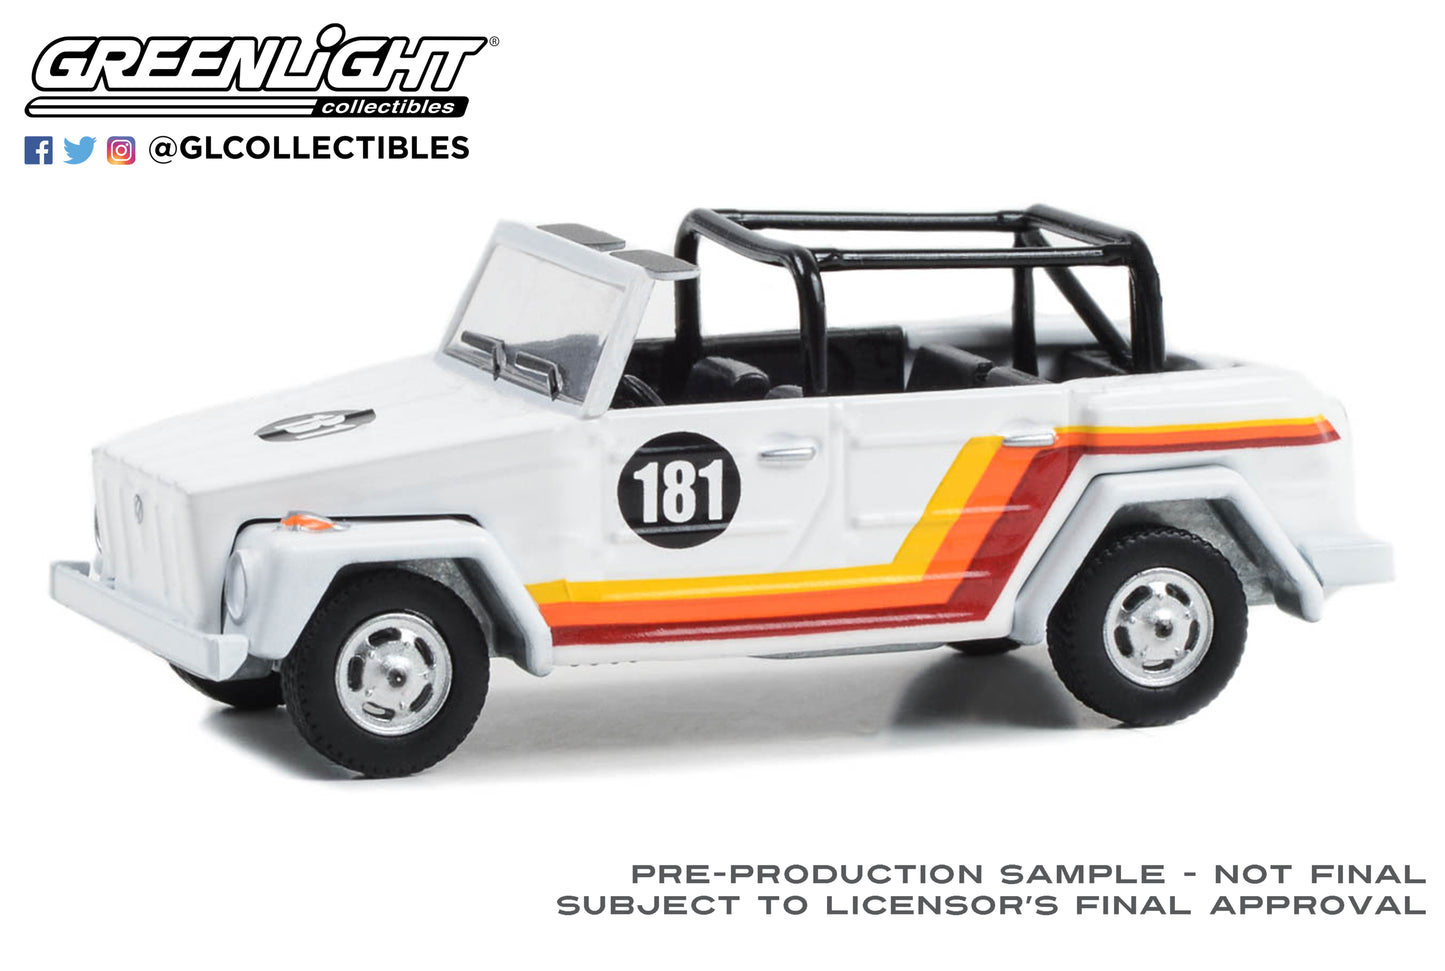 GreenLight 1:64 All-Terrain Series 15 - 1974 Volkswagen Thing (Type 181) #181 - White with Red, Orange and Yellow Stripes 35270-C